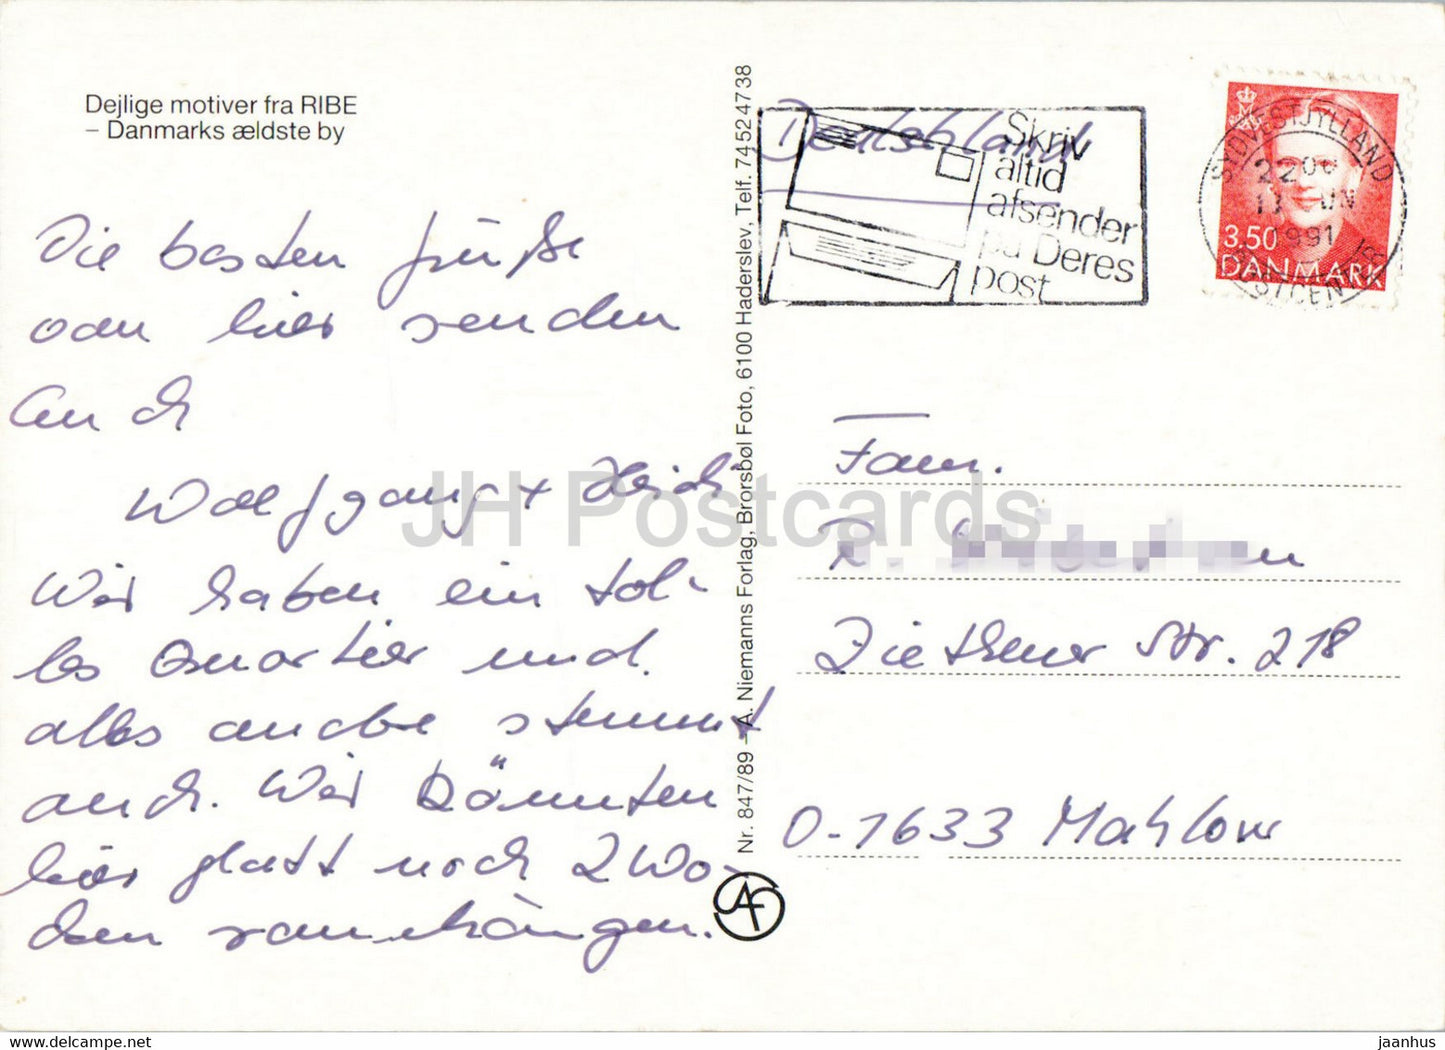 Greetings from Ribe - boat - town views - multiview - 1991 - Denmark - used